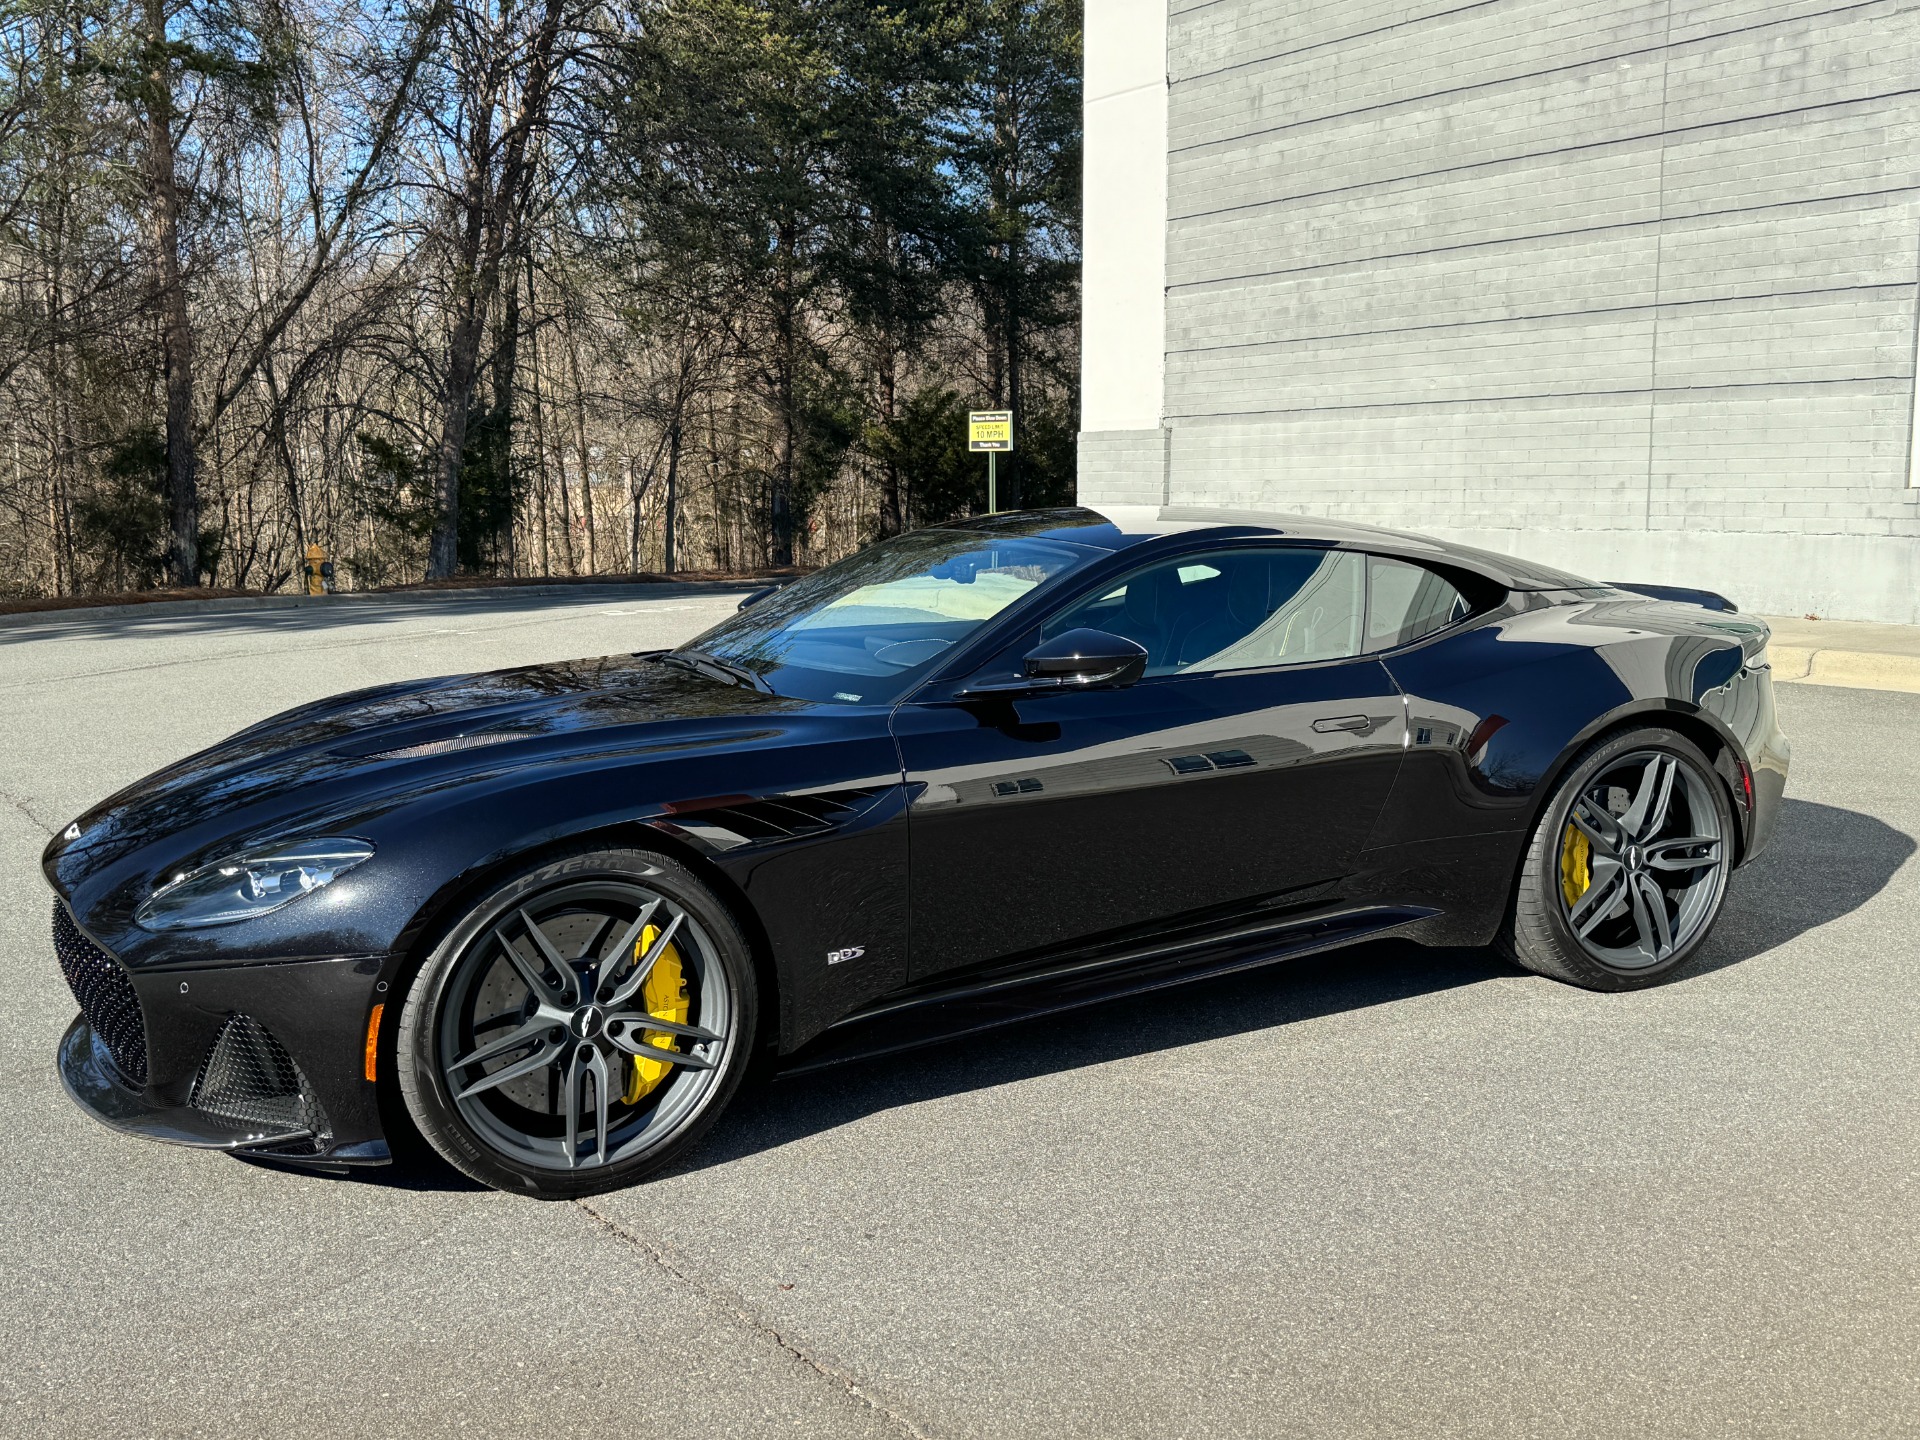 Used 2020 Aston Martin DBS SUPERLEGGERA / CARBON FIBER / V12 750HP / ACCENT STITCHING for sale $240,000 at Formula Imports in Charlotte NC 28227 4